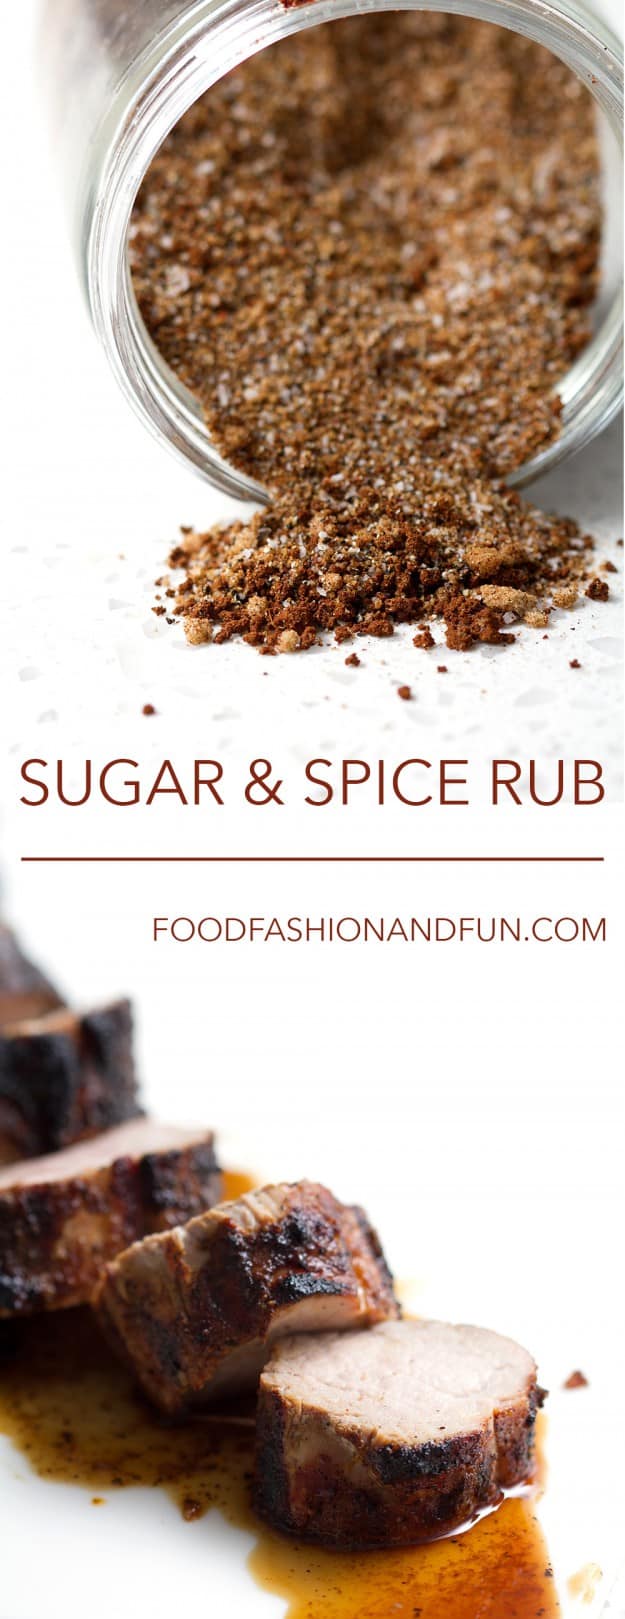 Sugar and Spice Rub. Perfect for pork, beef, chicken or even shrimp. It tastes good on everything!